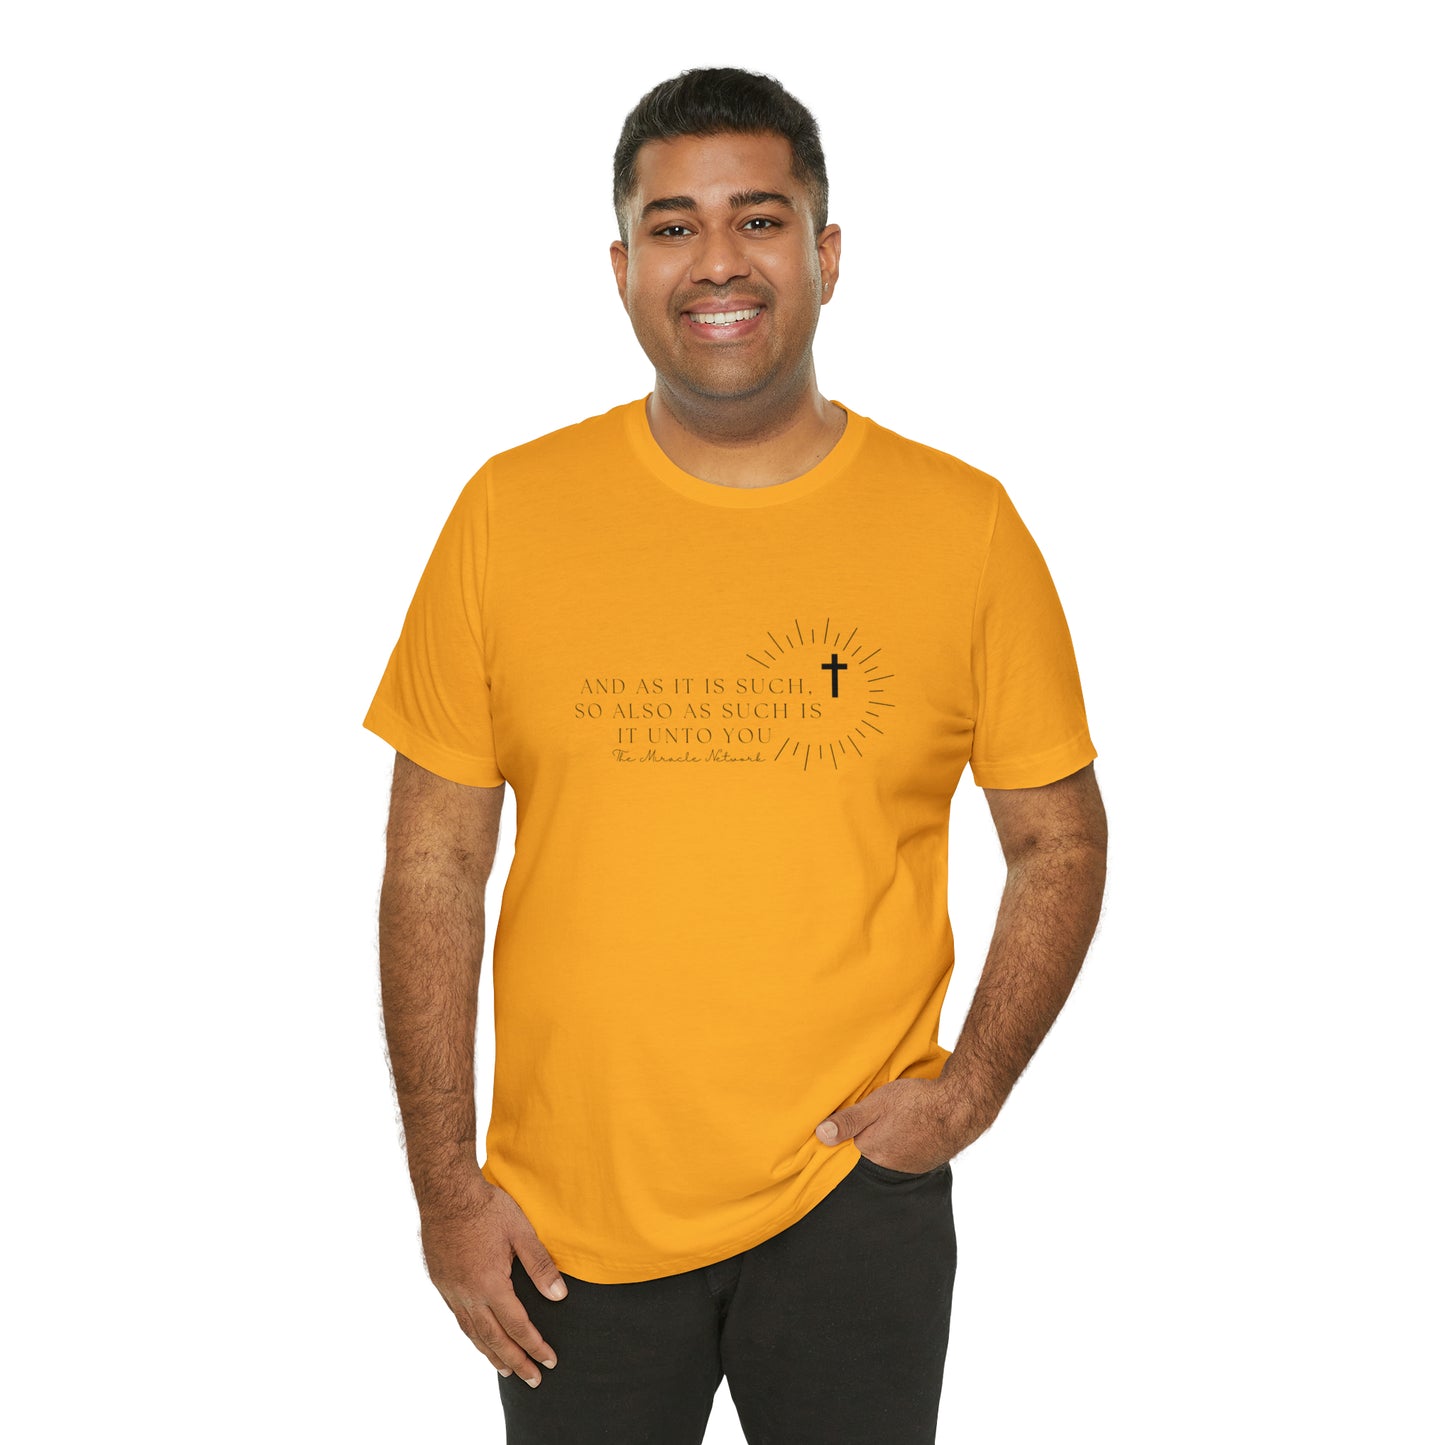 Arrested Development "And as it is such" Short Sleeve Tee